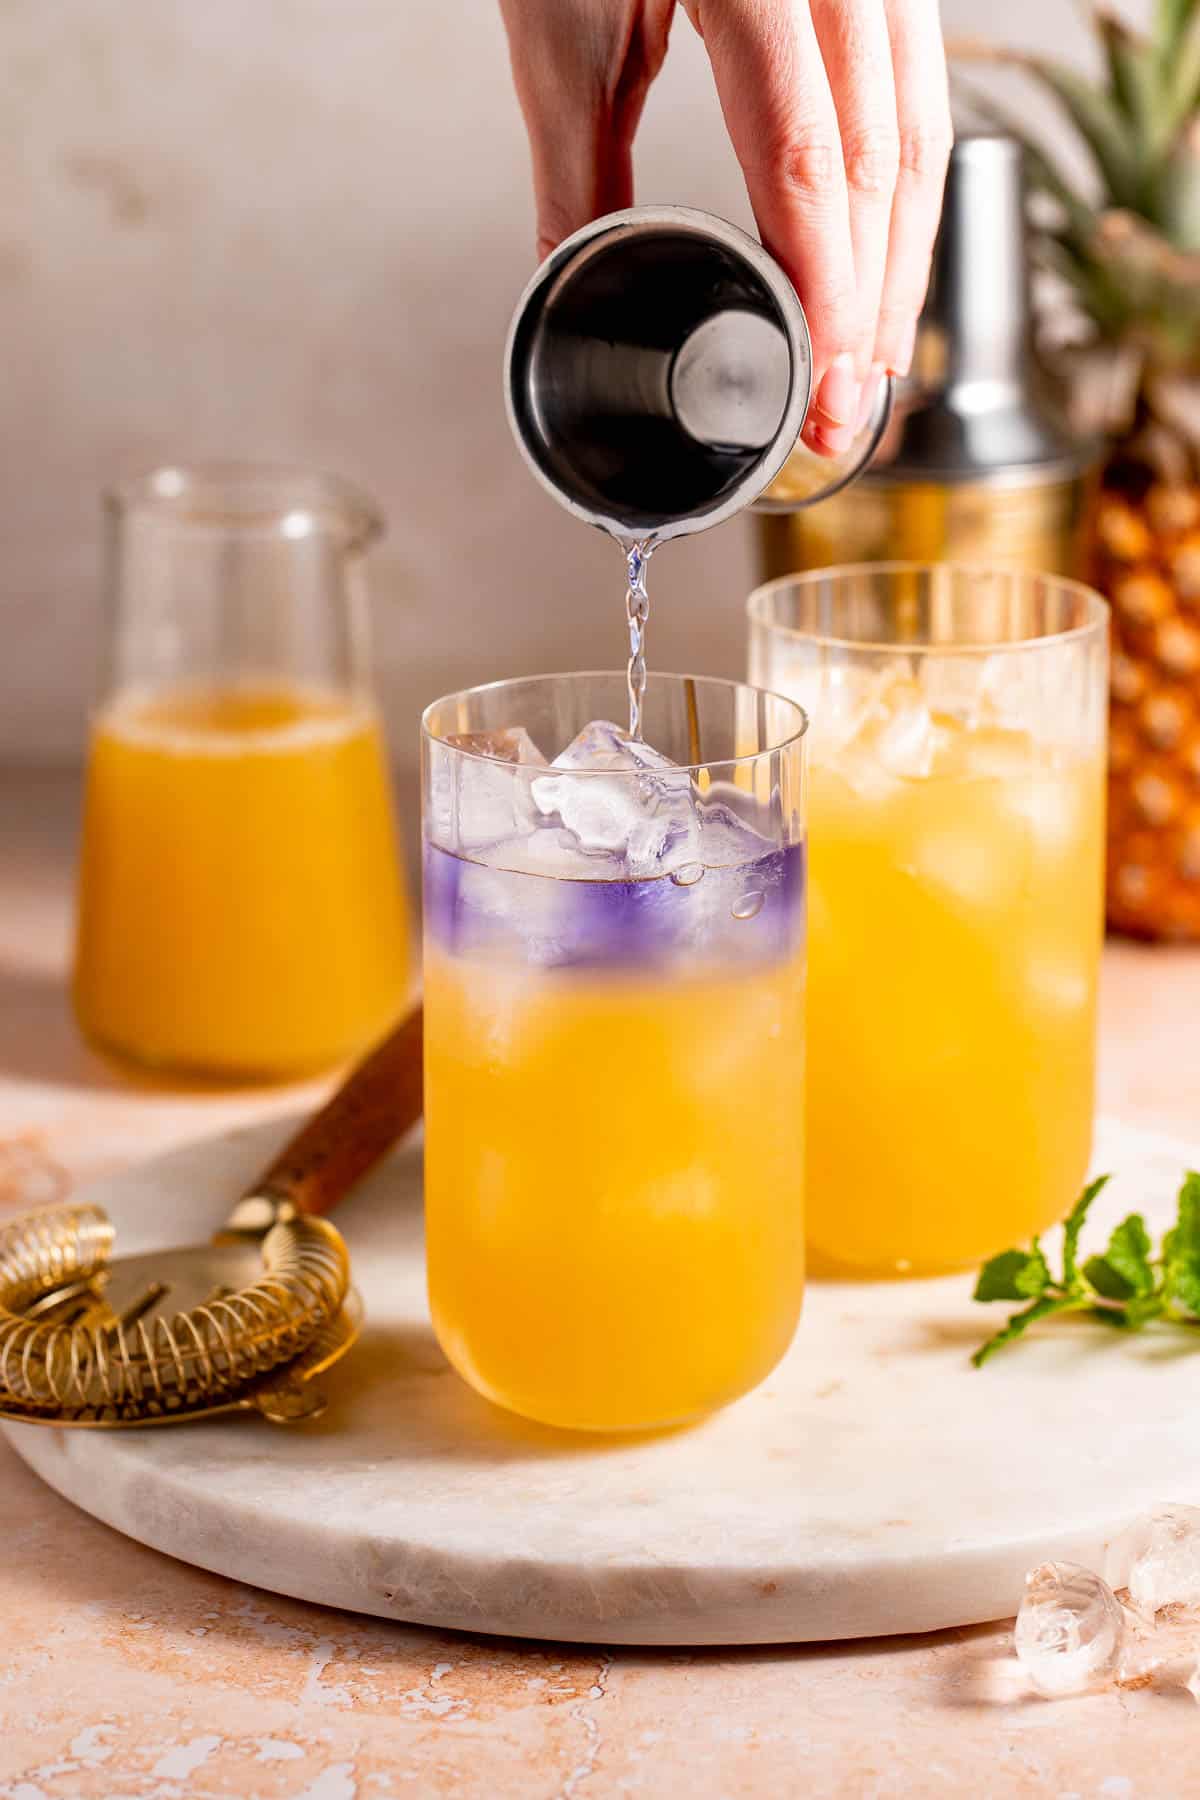 A purple liquid pouring slowly over an orange liquid in a serving glass.